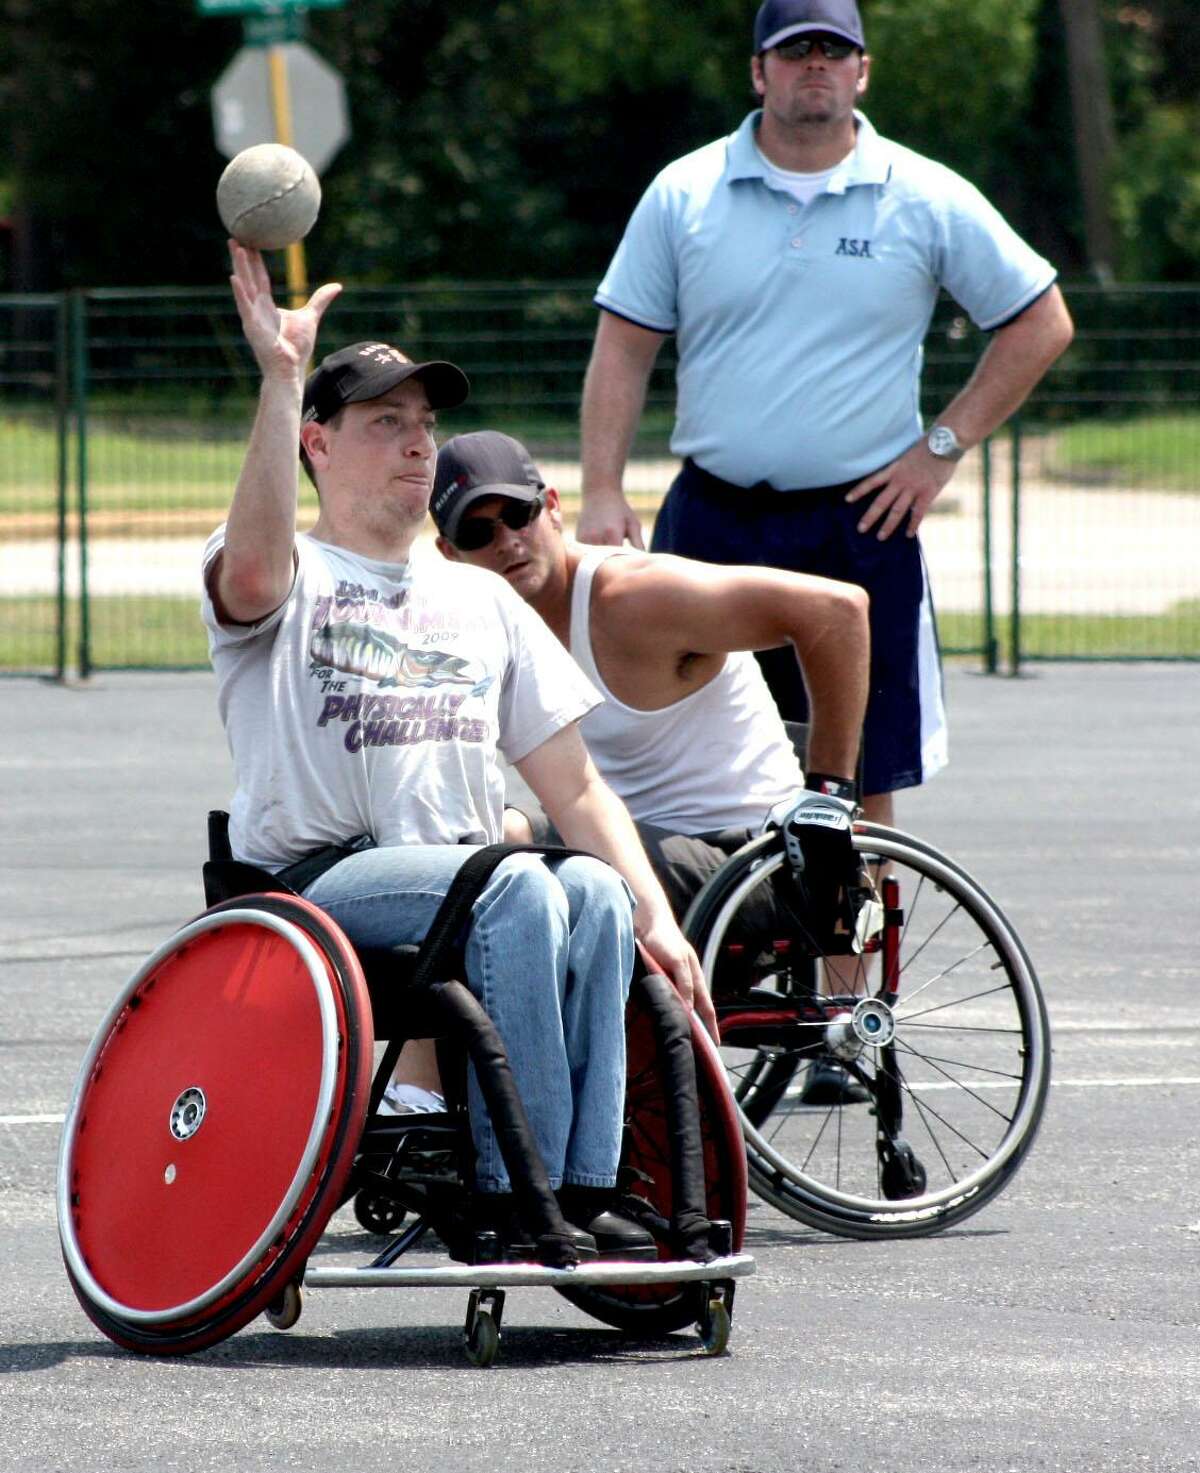 After a two-year absence, the Wheelchair Wind-Up Softball Tournament returns Memorial Day weekend to the Verne Cox Multipurpose Recreation Center in Pasadena. More than 100 athletes from throughout the state are expected to participate in the event, scheduled for May 28-29.